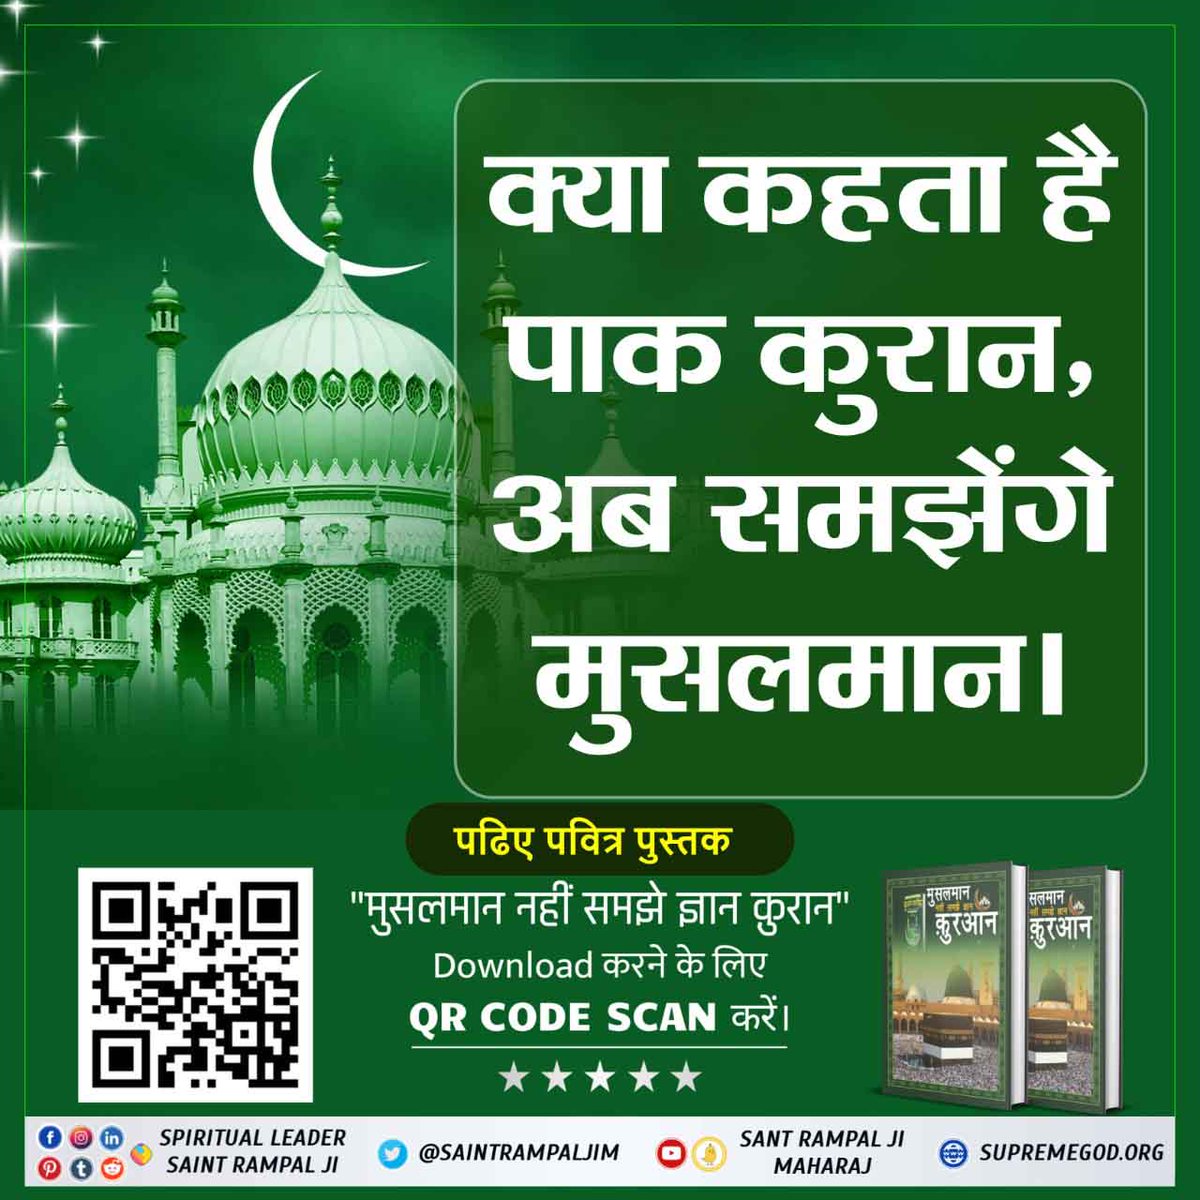 #RealKnowledgeOfIslam
The Holy Scriptures of Islam proves that the Creator of the entire nature, the Destroyer of all sins, the Almighty, Eternal God is in visible human-like form and resides in Satlok.His name is Kabir, and is also called 'Allahu Akbar'.
Baakhabar Sant Rampal Ji